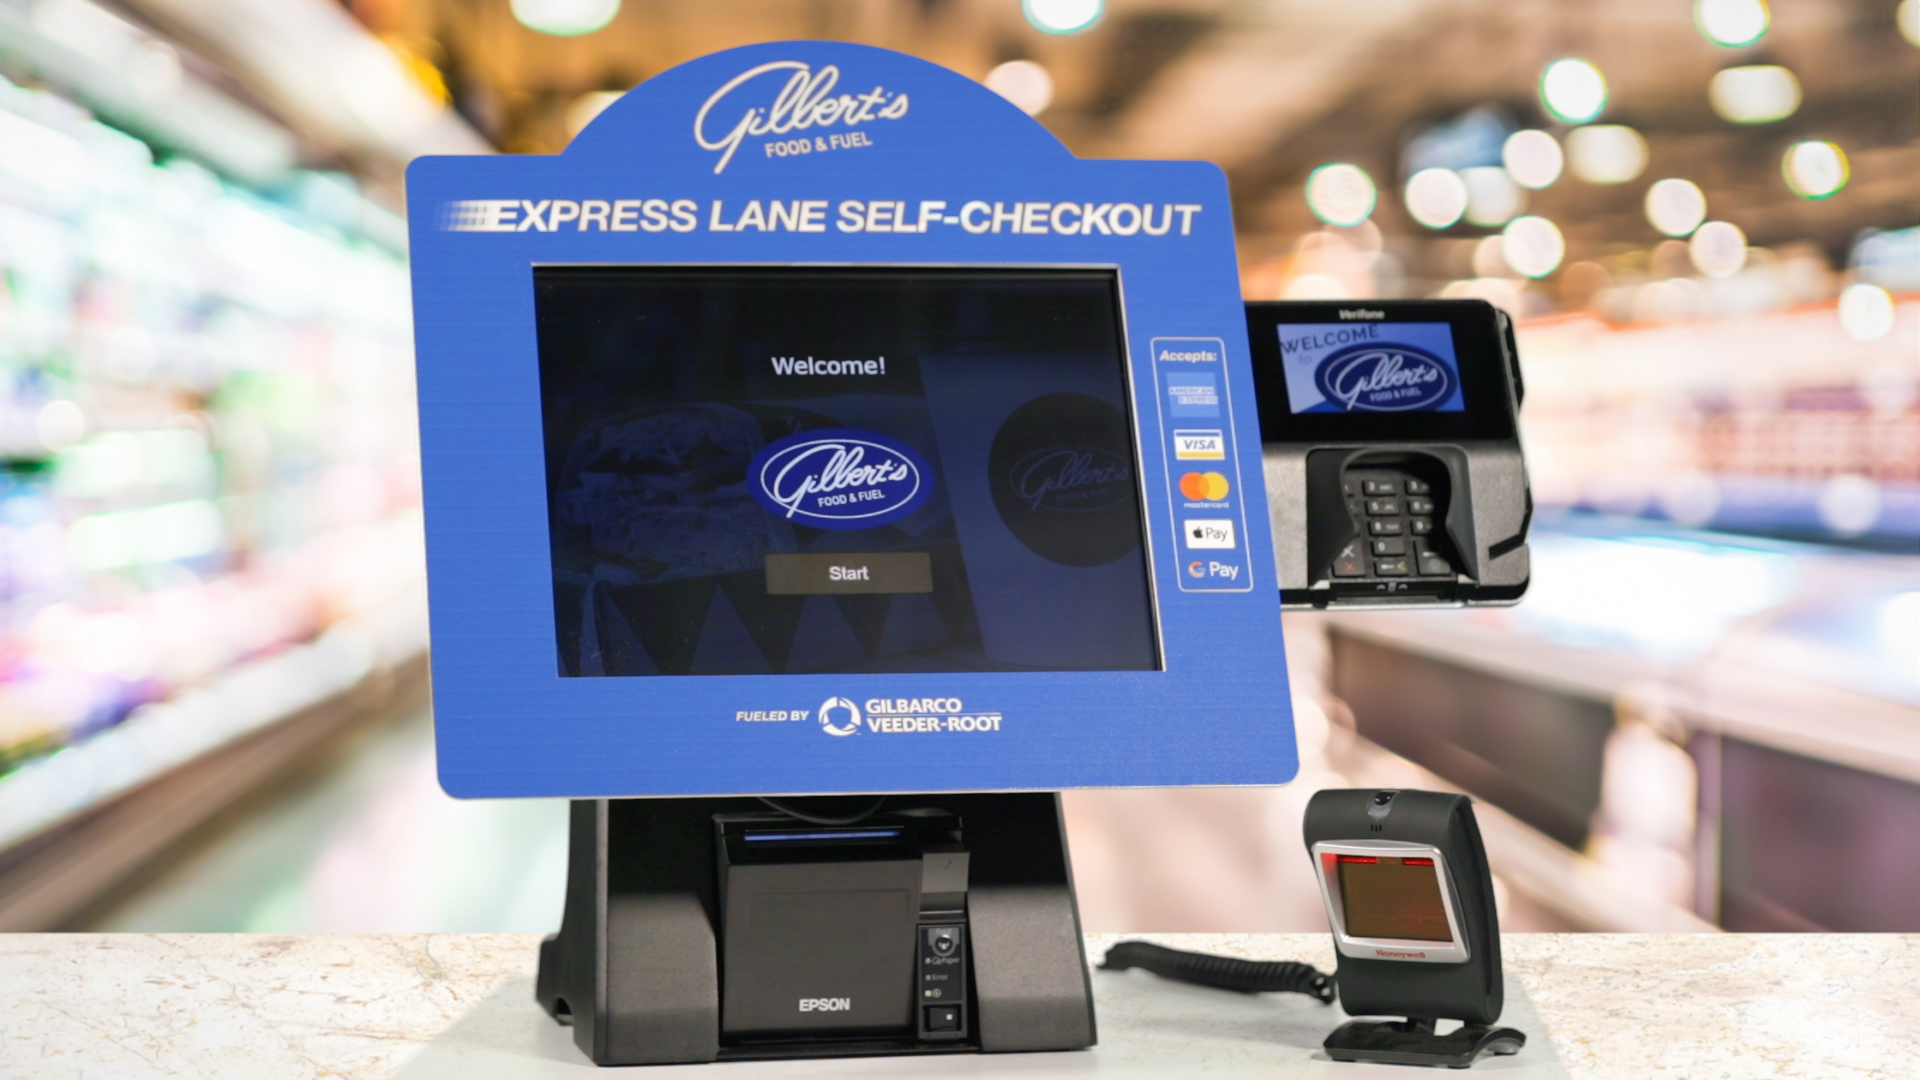 PASSPORT-SELFCHECKOUT Gilbarco Passport POS Self-Checkout <! -- WEB USE ONLY: DO NOT MODIFY ANYTHING OR YOU WILL SCREW IT UP --> <br><br> Call Us at 1.800.238.1225 or <a href='contact-us'> Email Us</a> For A Free Quote!!<br><br>See Details Below.